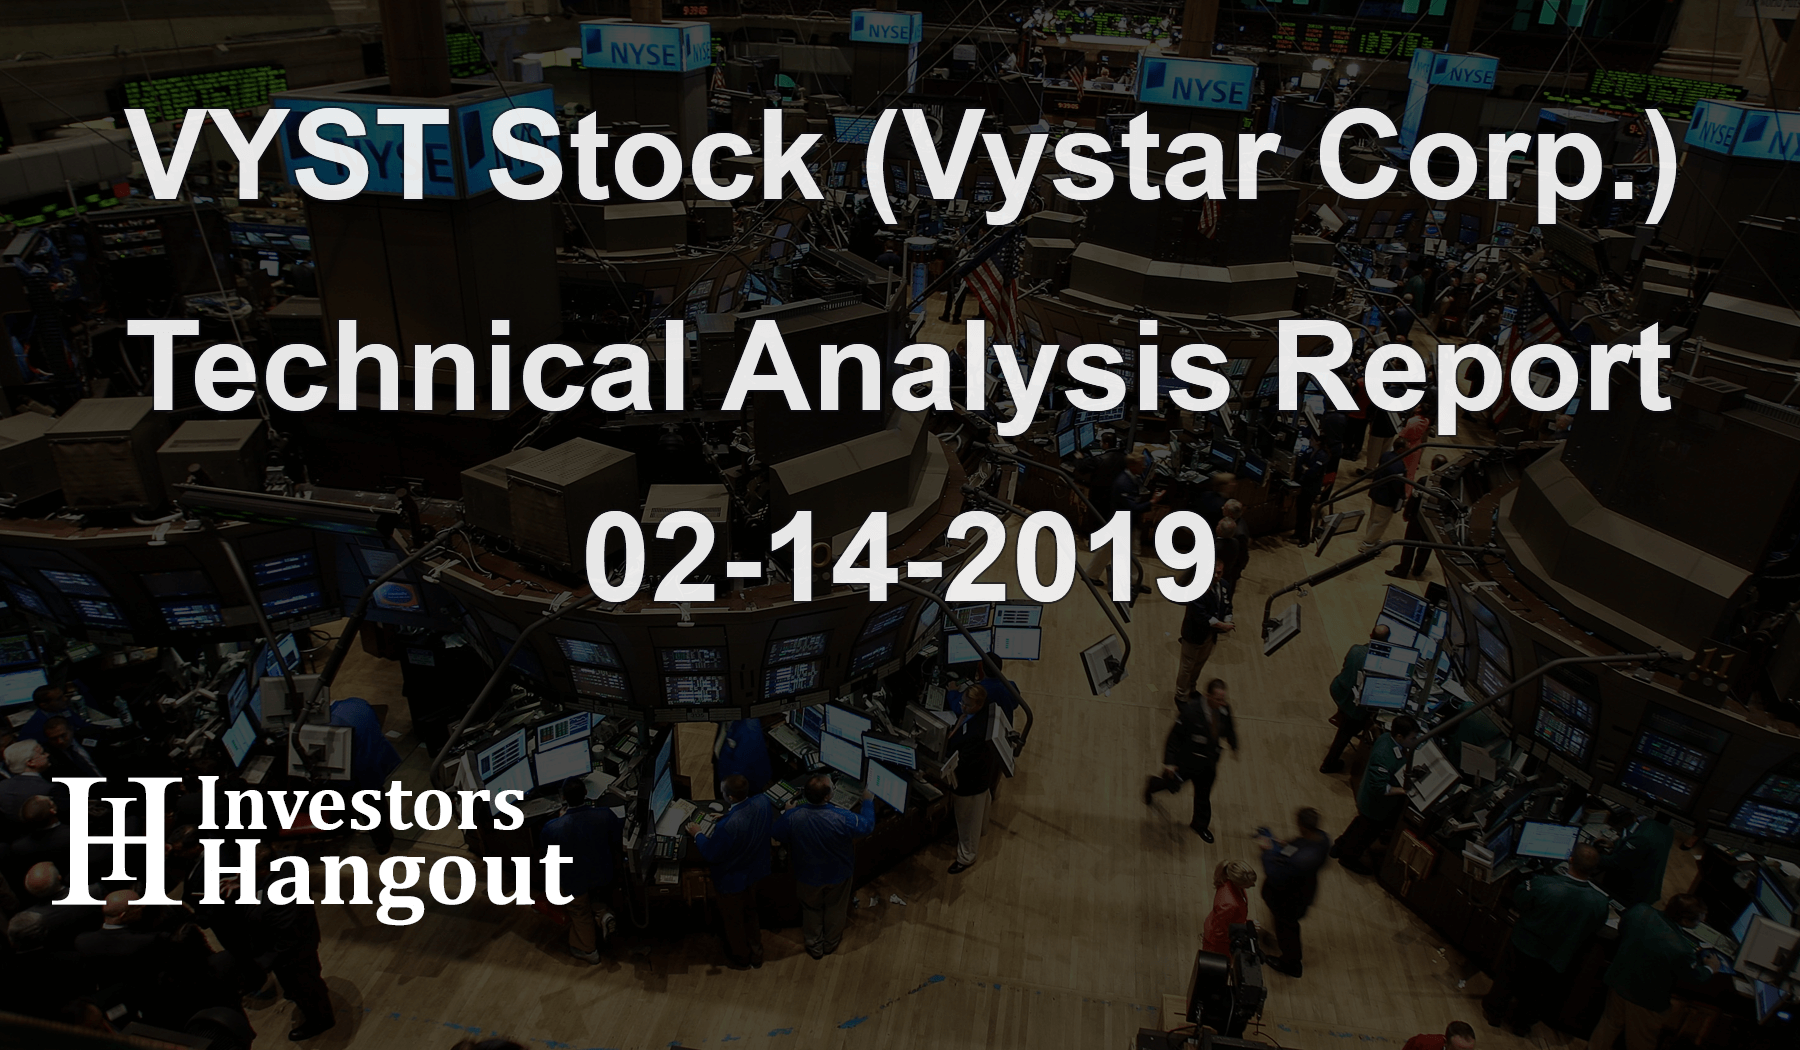 VYST Stock (Vystar Corp.) Technical Analysis Report 02-14-2019